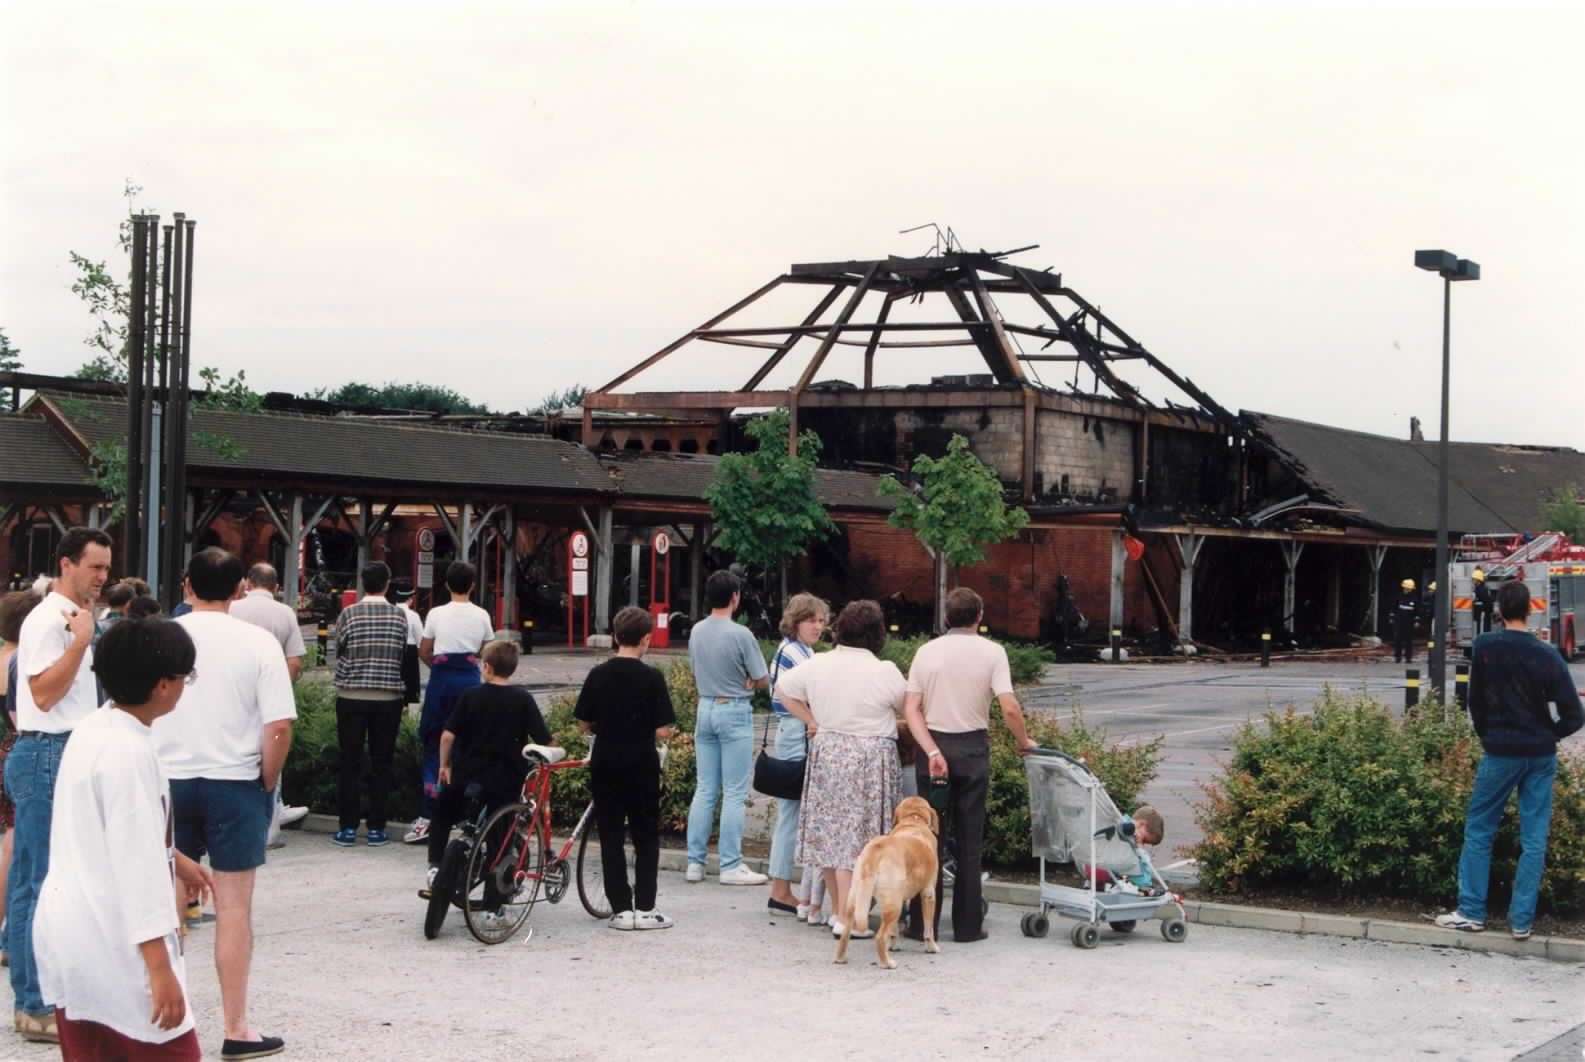 A fire broke out at Tesco in Grove Green, Maidstone, in July 1993. Kent Fire Brigade's senior divisional officer, Peter May, said he had never seen such a fast spread of fire in his 27 years of service